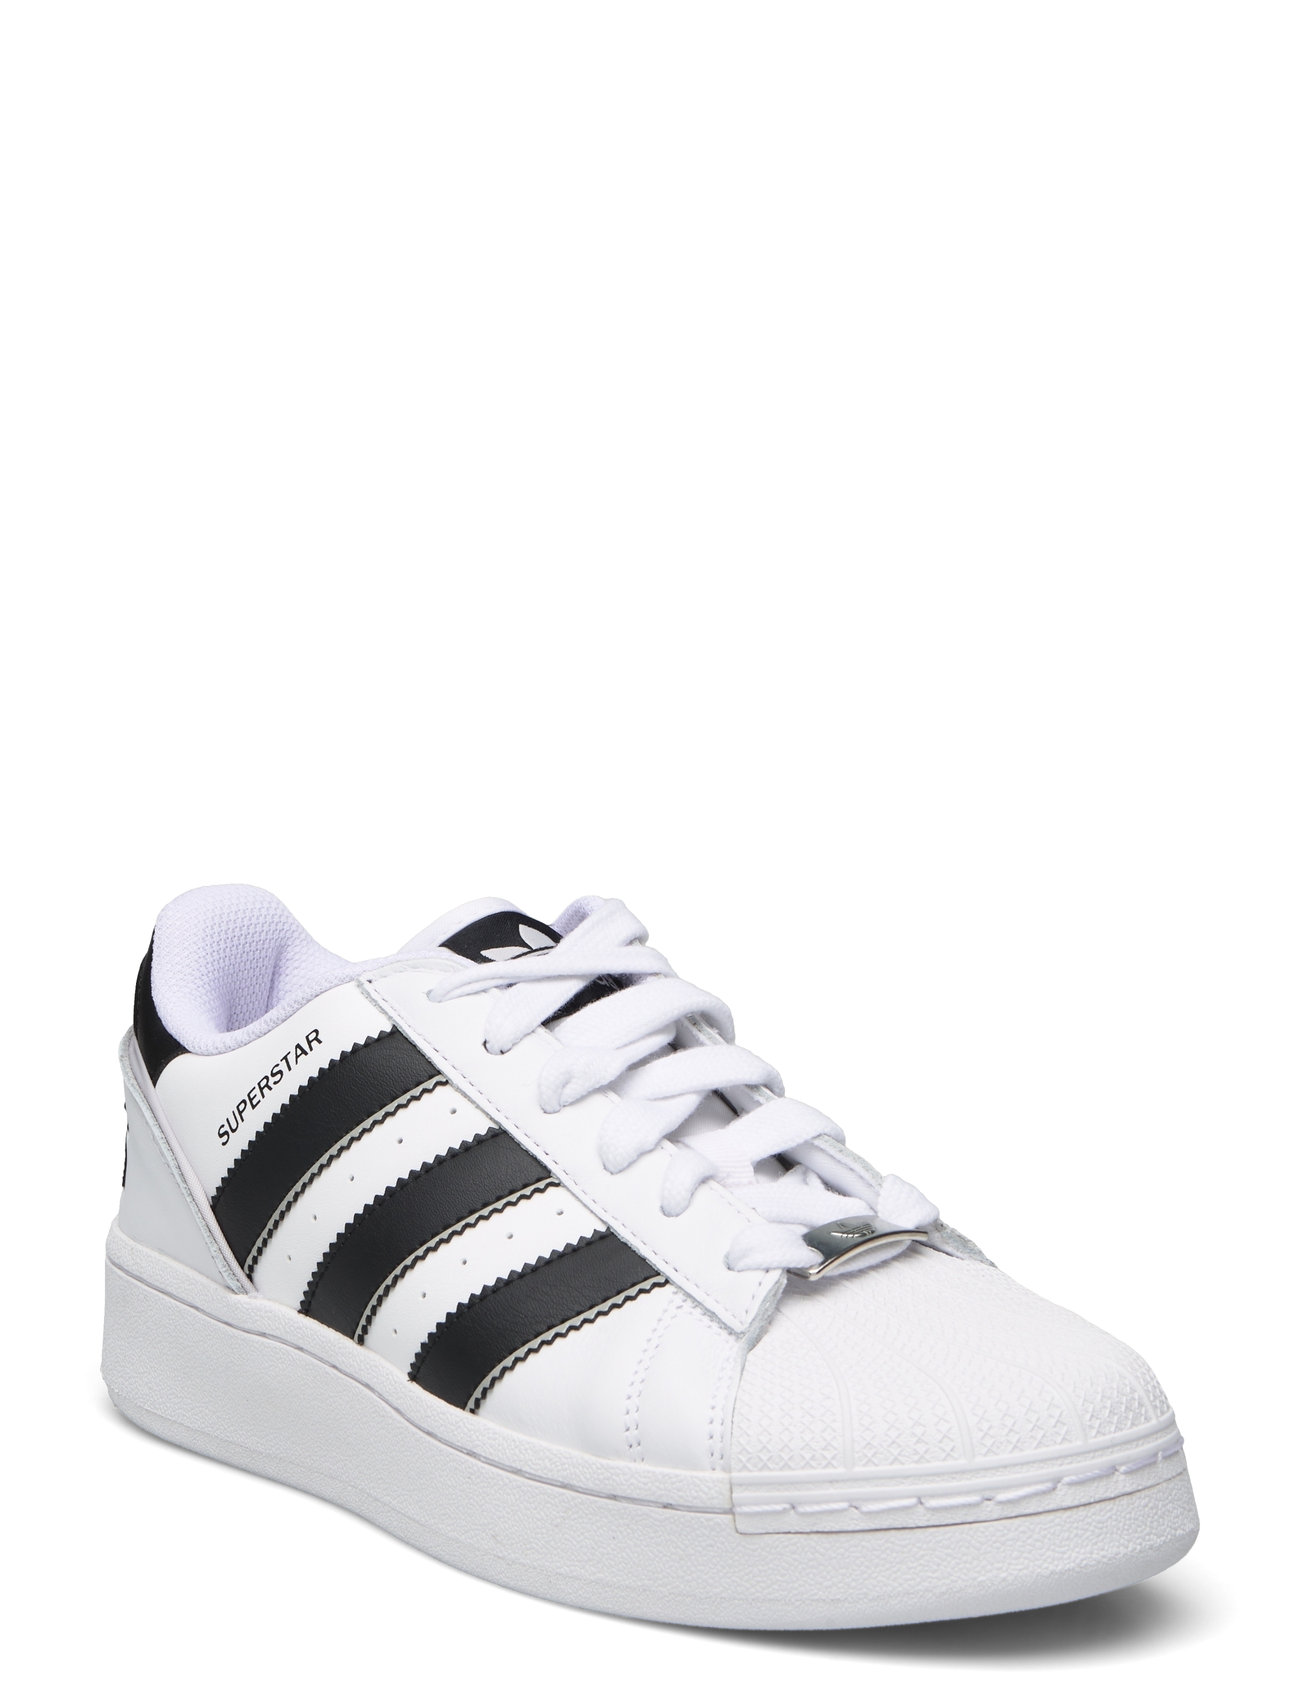 Superstar Xlg T Sport Sneakers Low-top Sneakers White Adidas Originals